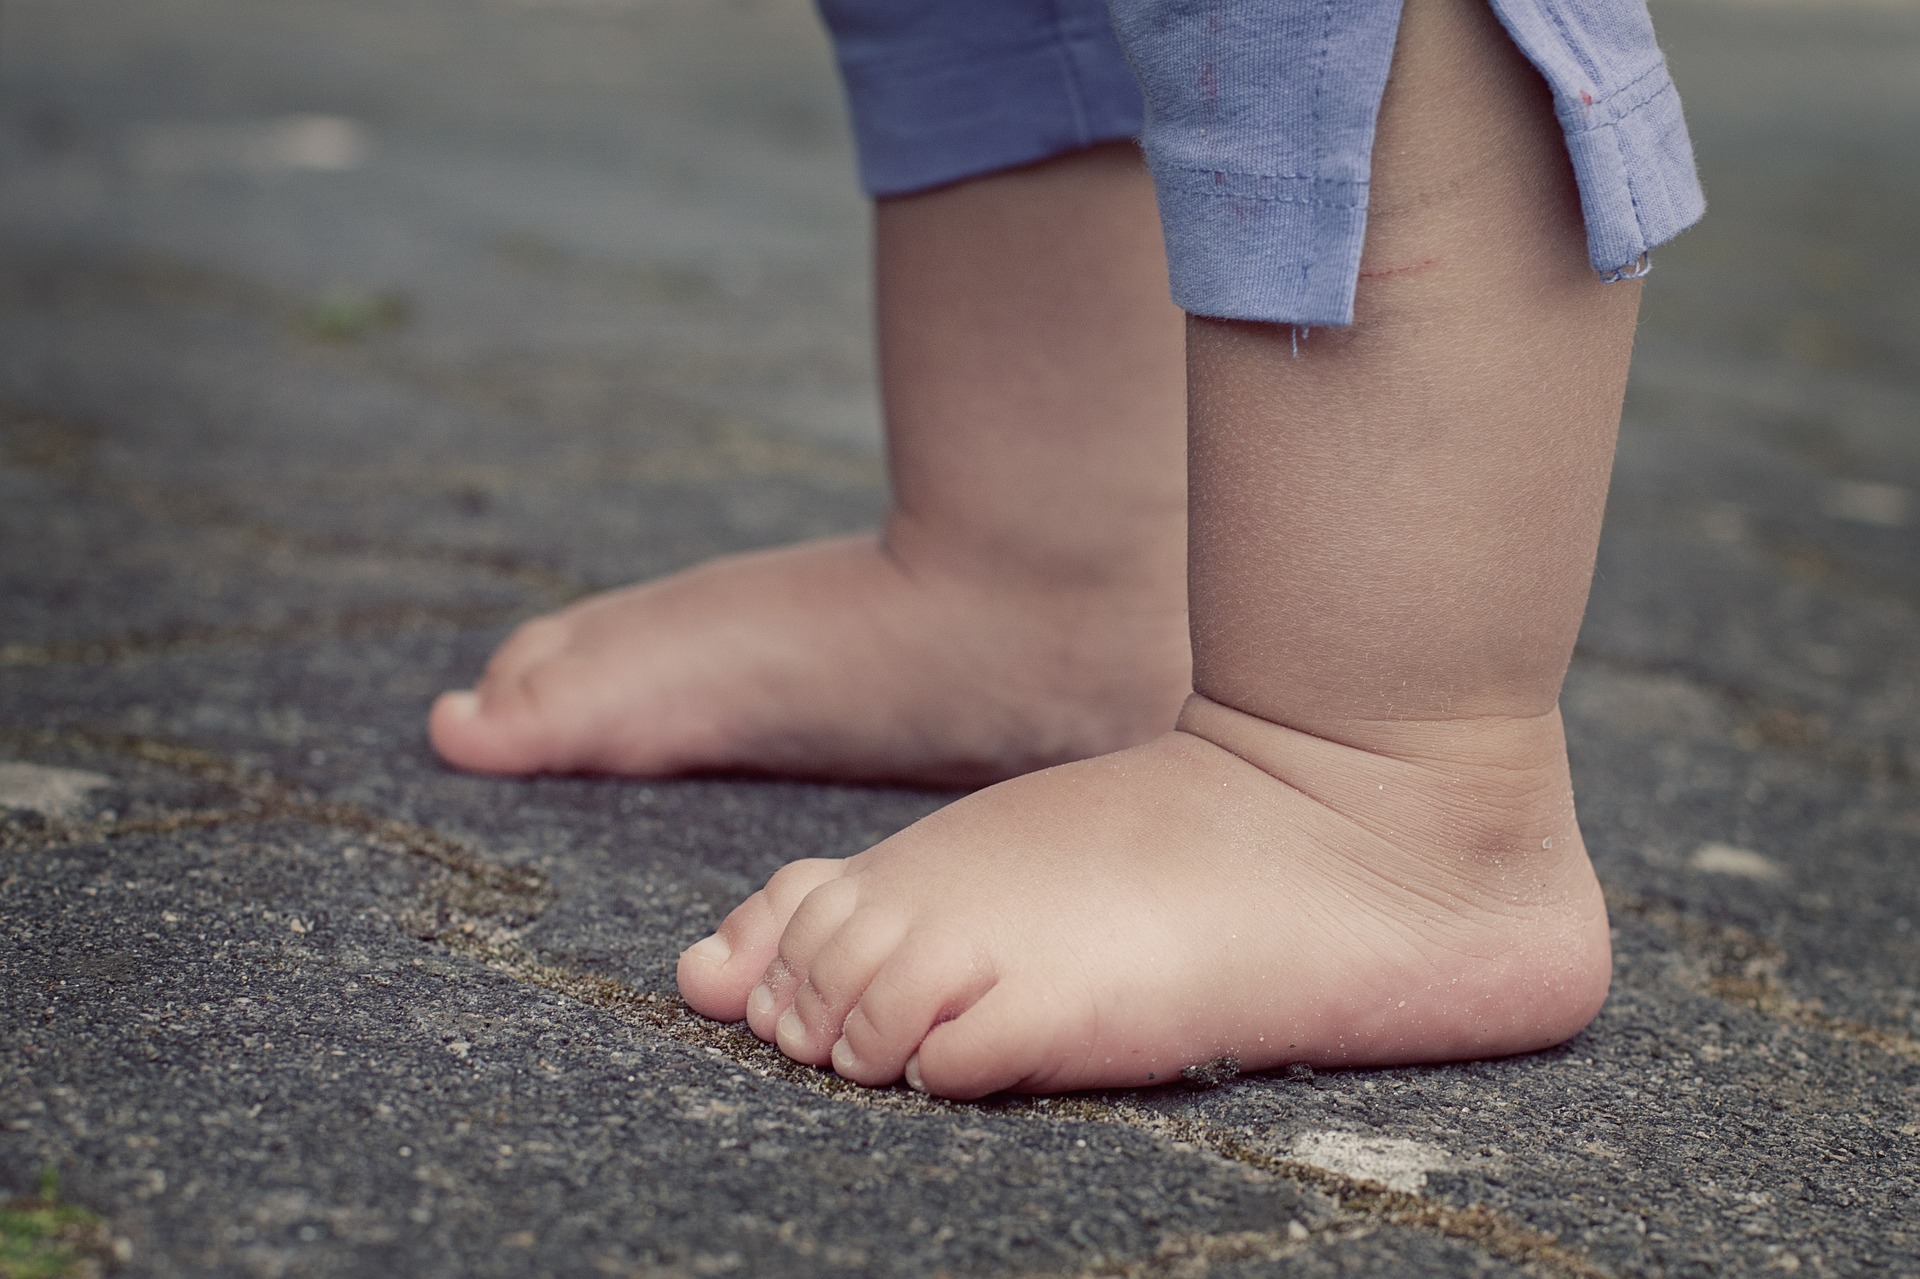 Barefoot Babies & Toddlers in Public: Safe or Unsanitary?